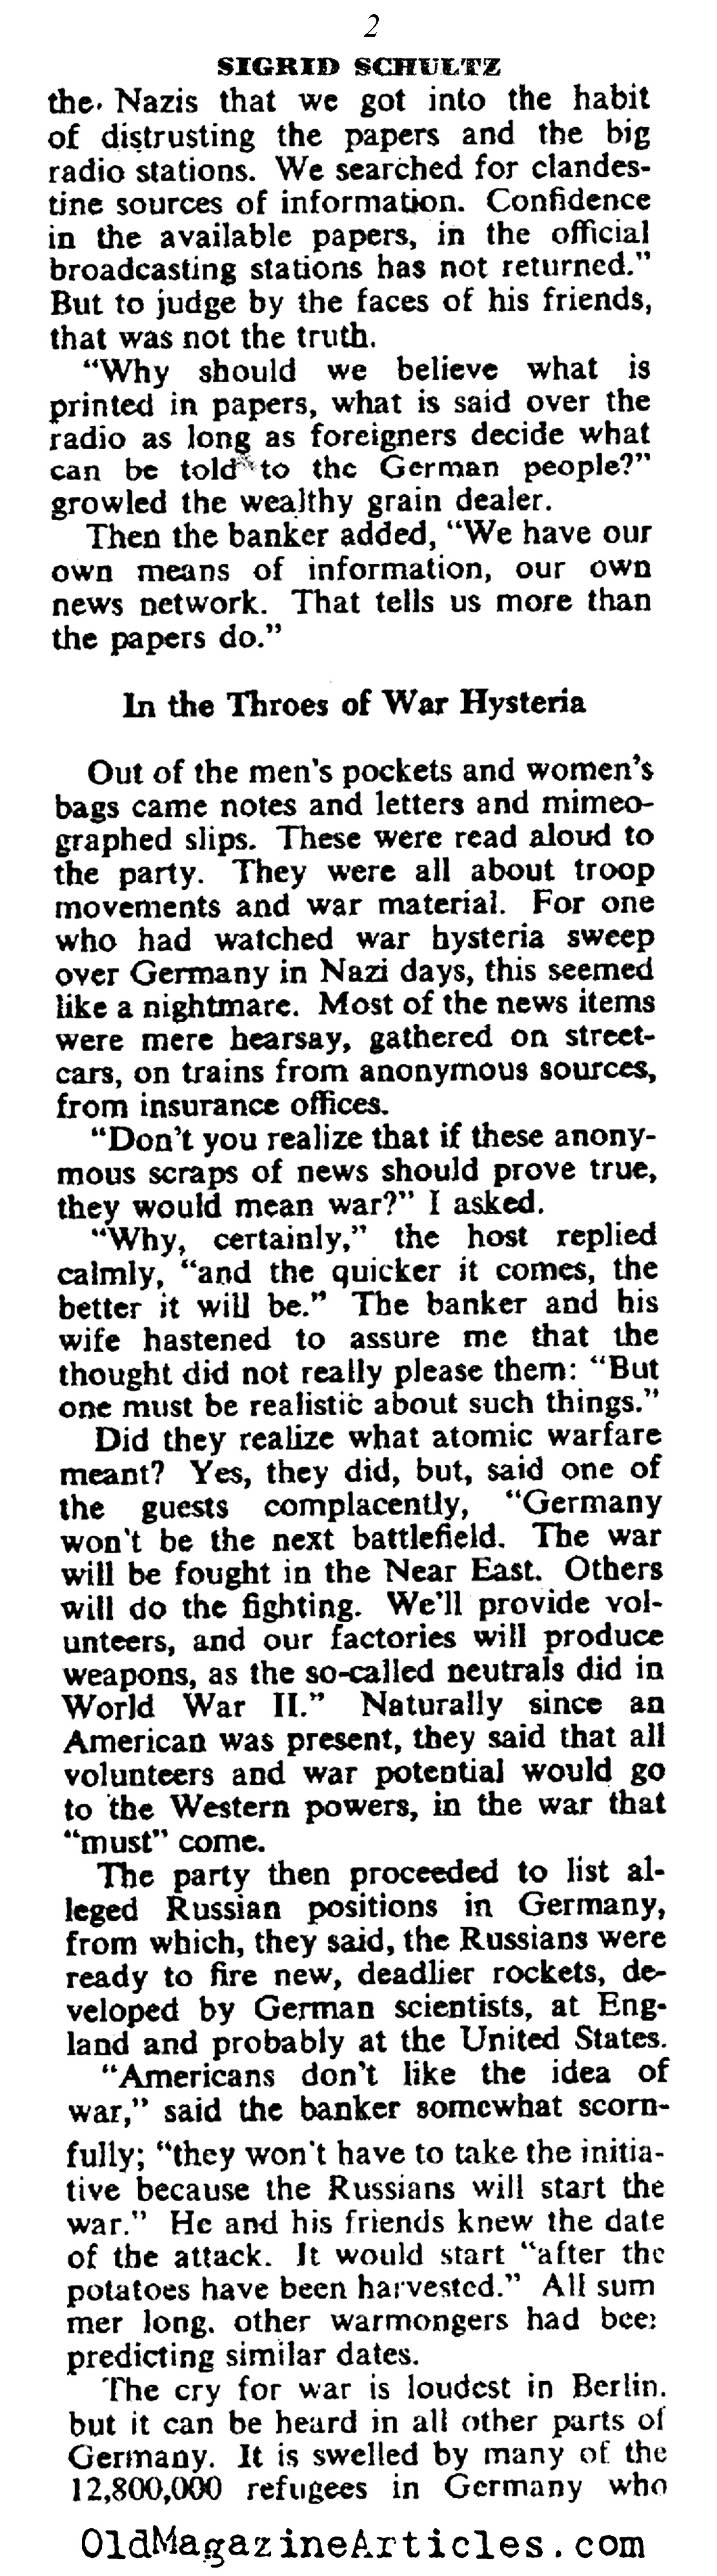 The Rebellious Souls in Post-War Germany (Collier's Magazine, 1947)